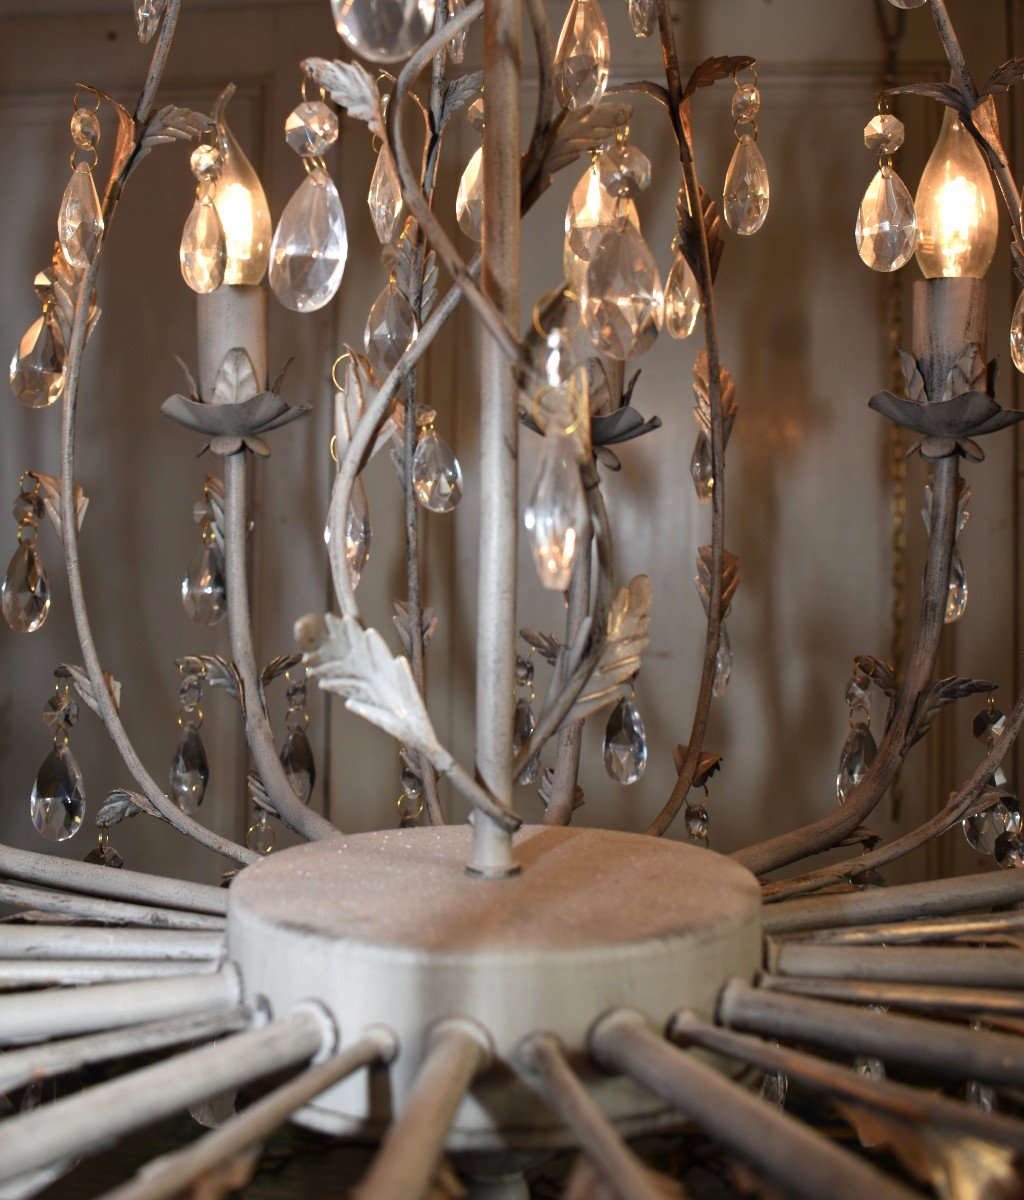 Cage Chandelier With Tassels In The Taste Of Maison Baguès With 12 Arms Of Lights.-photo-7